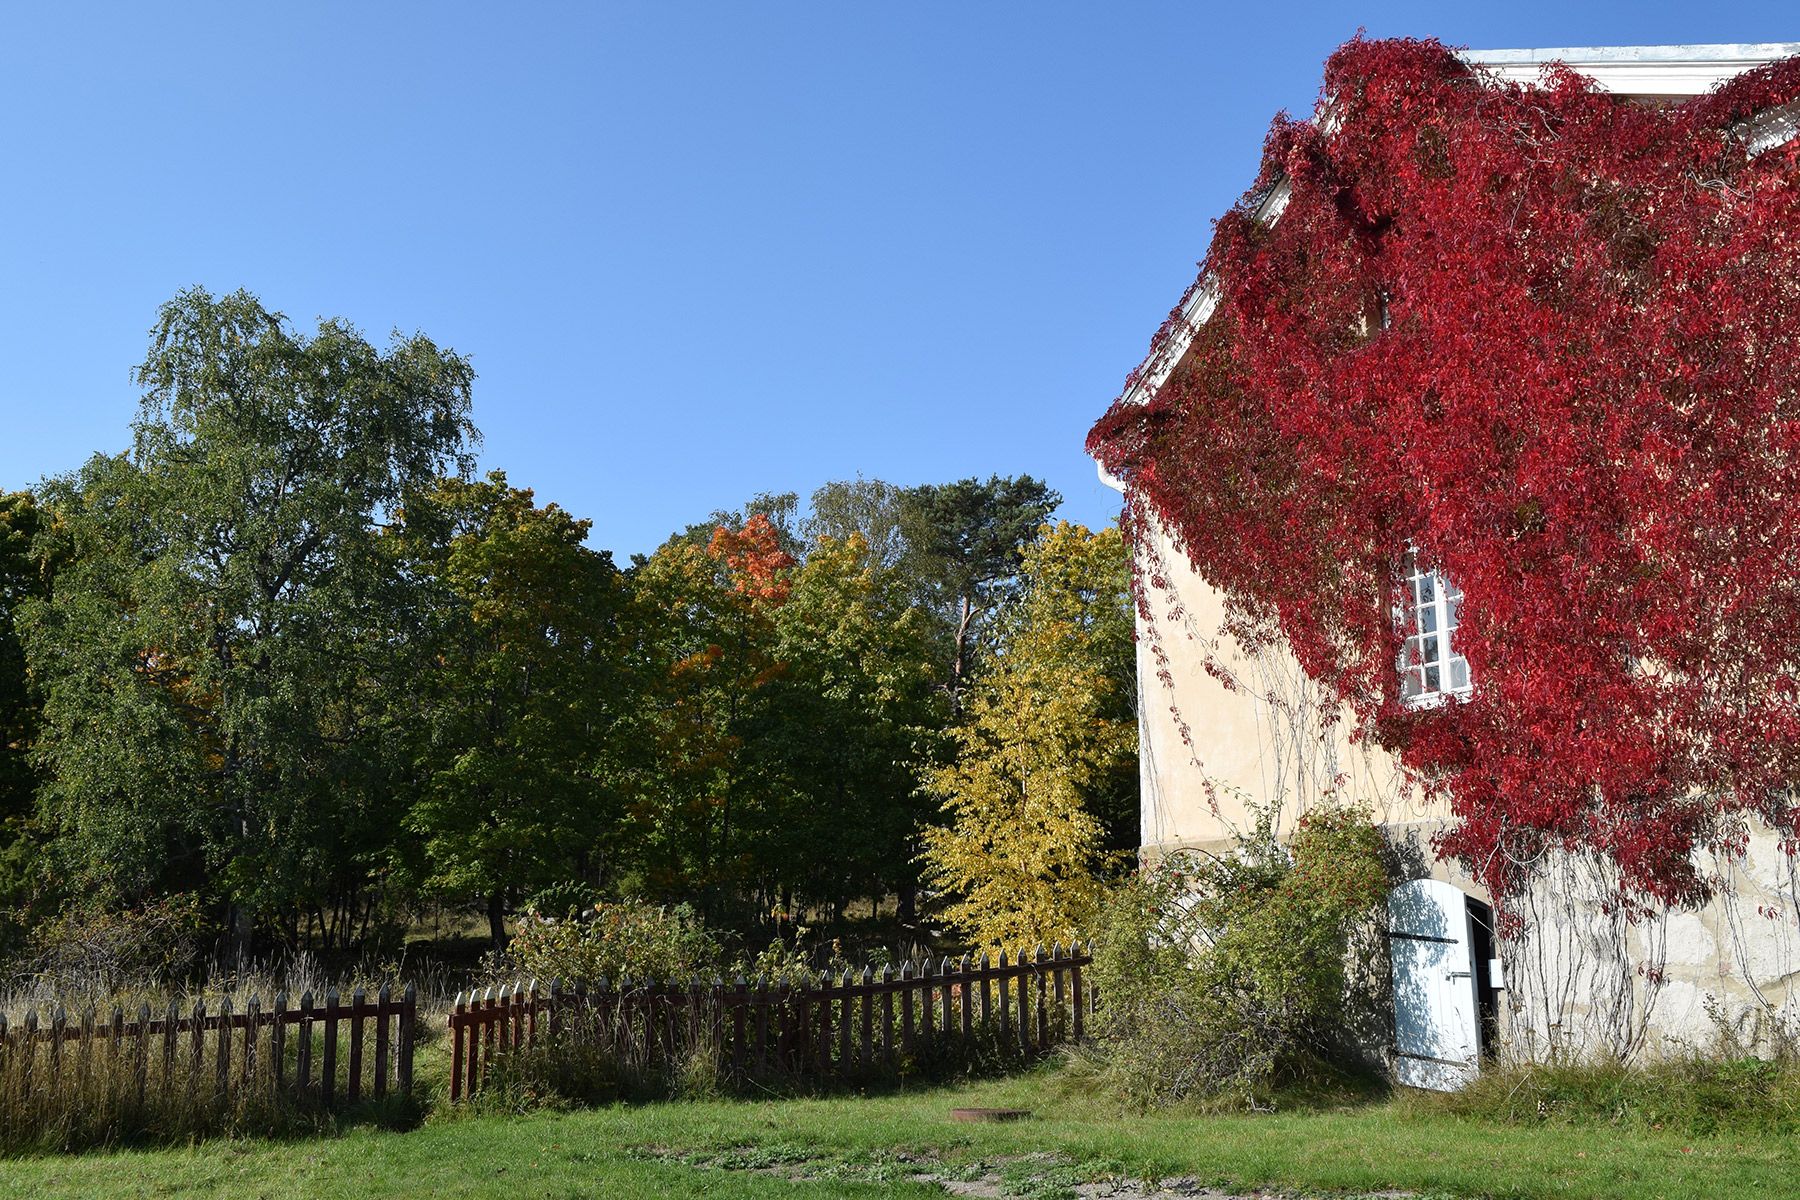 A building on the island of Seili covered in red autumn leaves.